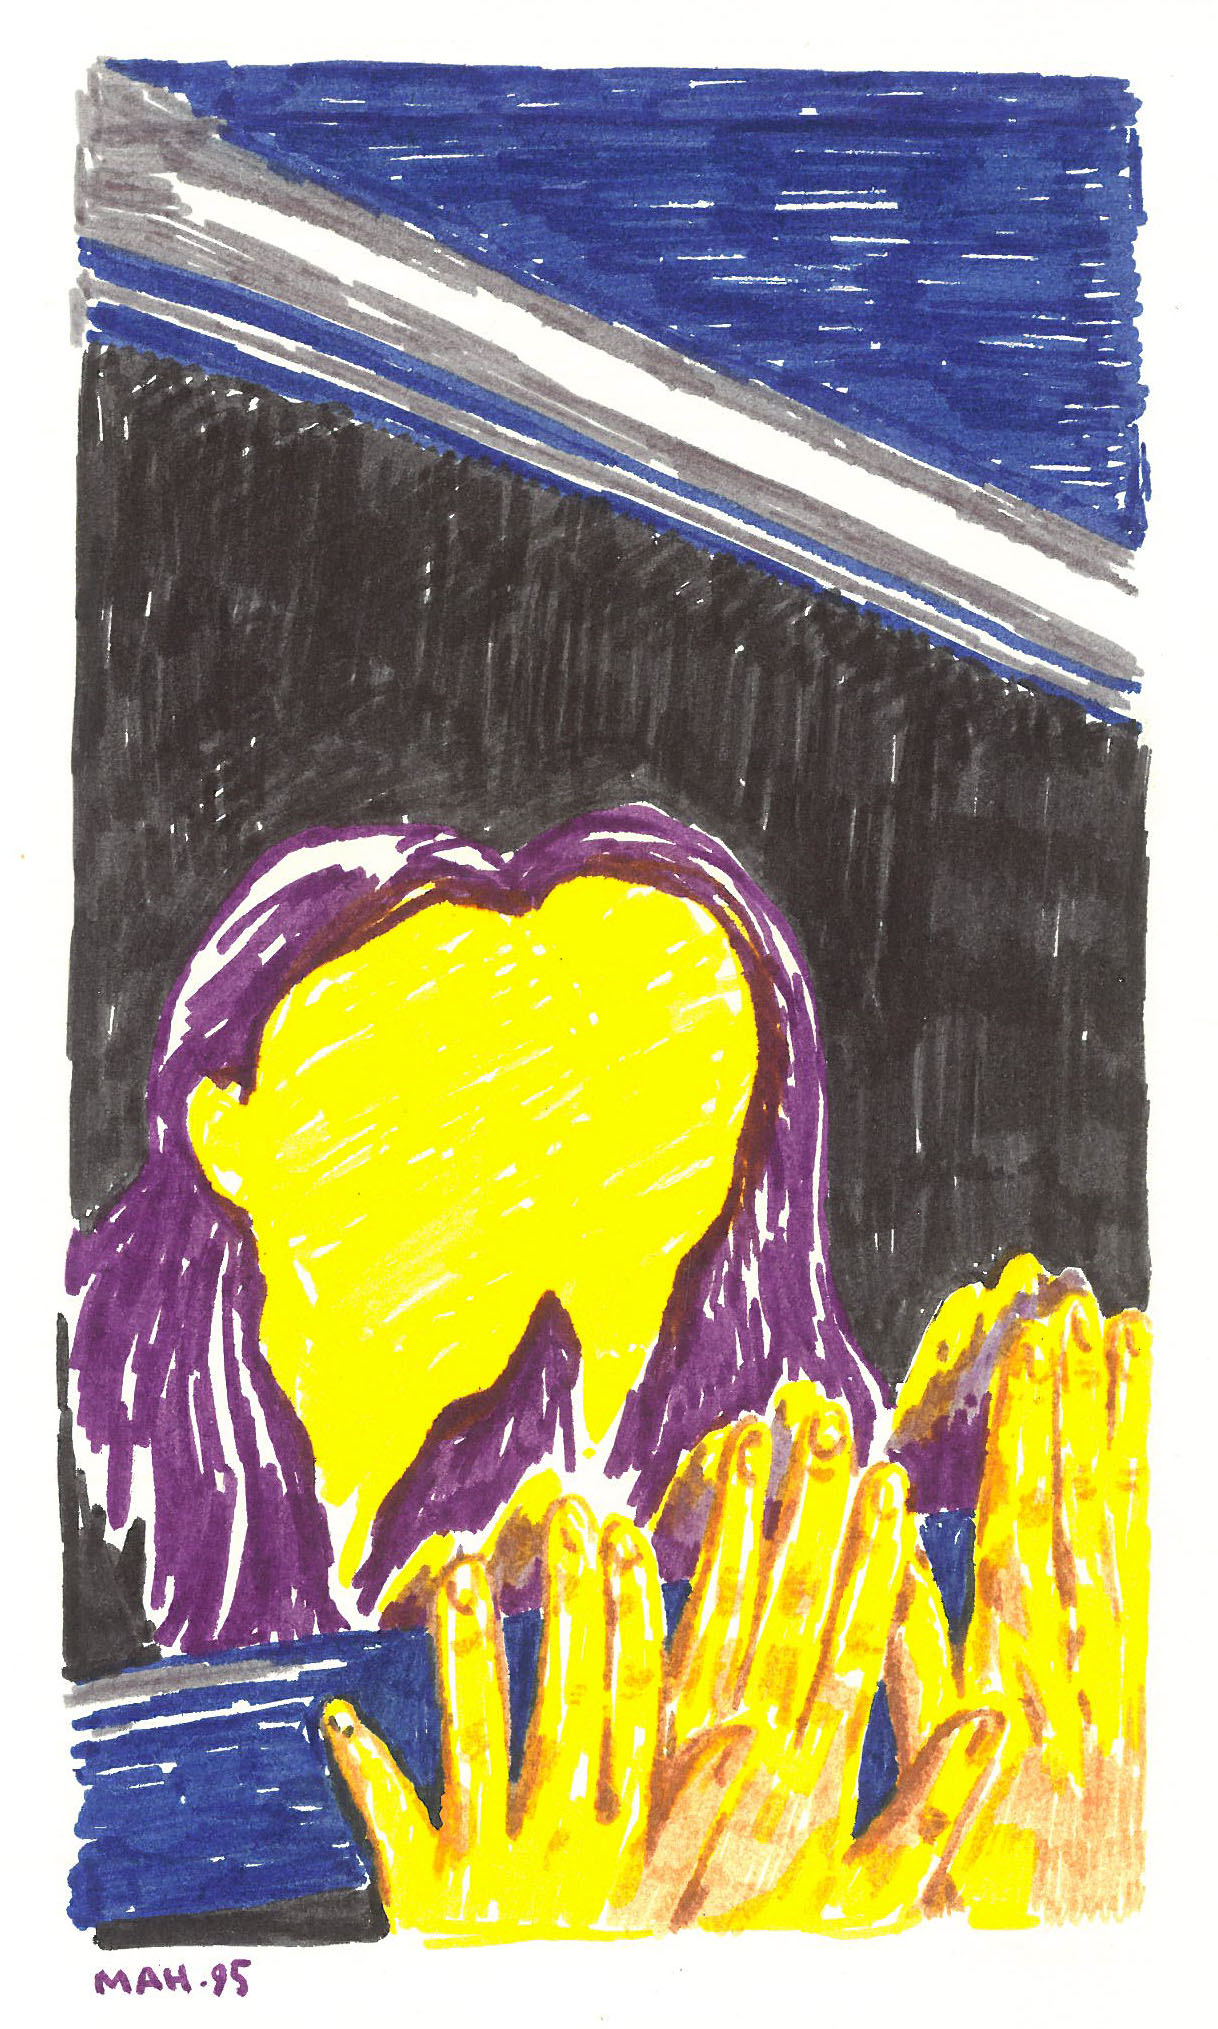 Untitled, 2016, Marker on paper, 10.5 x 17 cm